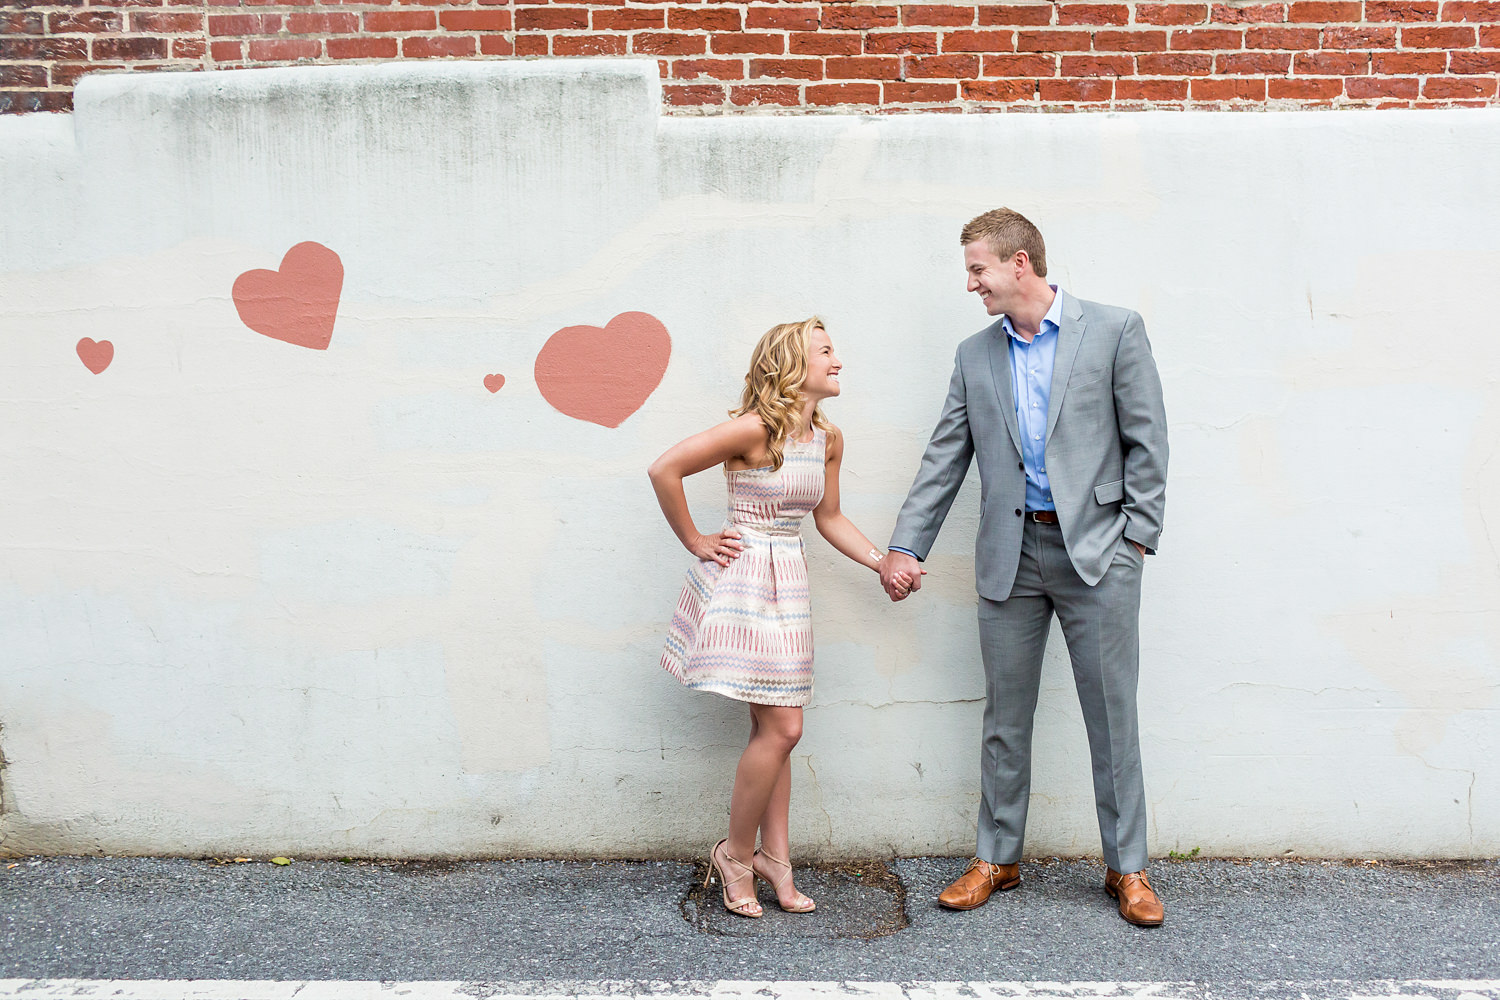 This engagement session was in Fredrick Maryland, they are standing in front of a wall with pink painted hearts, they are holding hands and laughing, the hearts match the bride's dress, Procopio Photography, best top Washington DC photographer, best top Maryland photographer, best top Virginia photographer, best top DMV photographer, best top wedding photographer, best top commercial photographer, best top portrait photographer, best top boudoir photographer, modern fine art portraits, dramatic, unique, different, bold, editorial, photojournalism, award winning photographer, published photographer, memorable images, be different, stand out, engagement photography